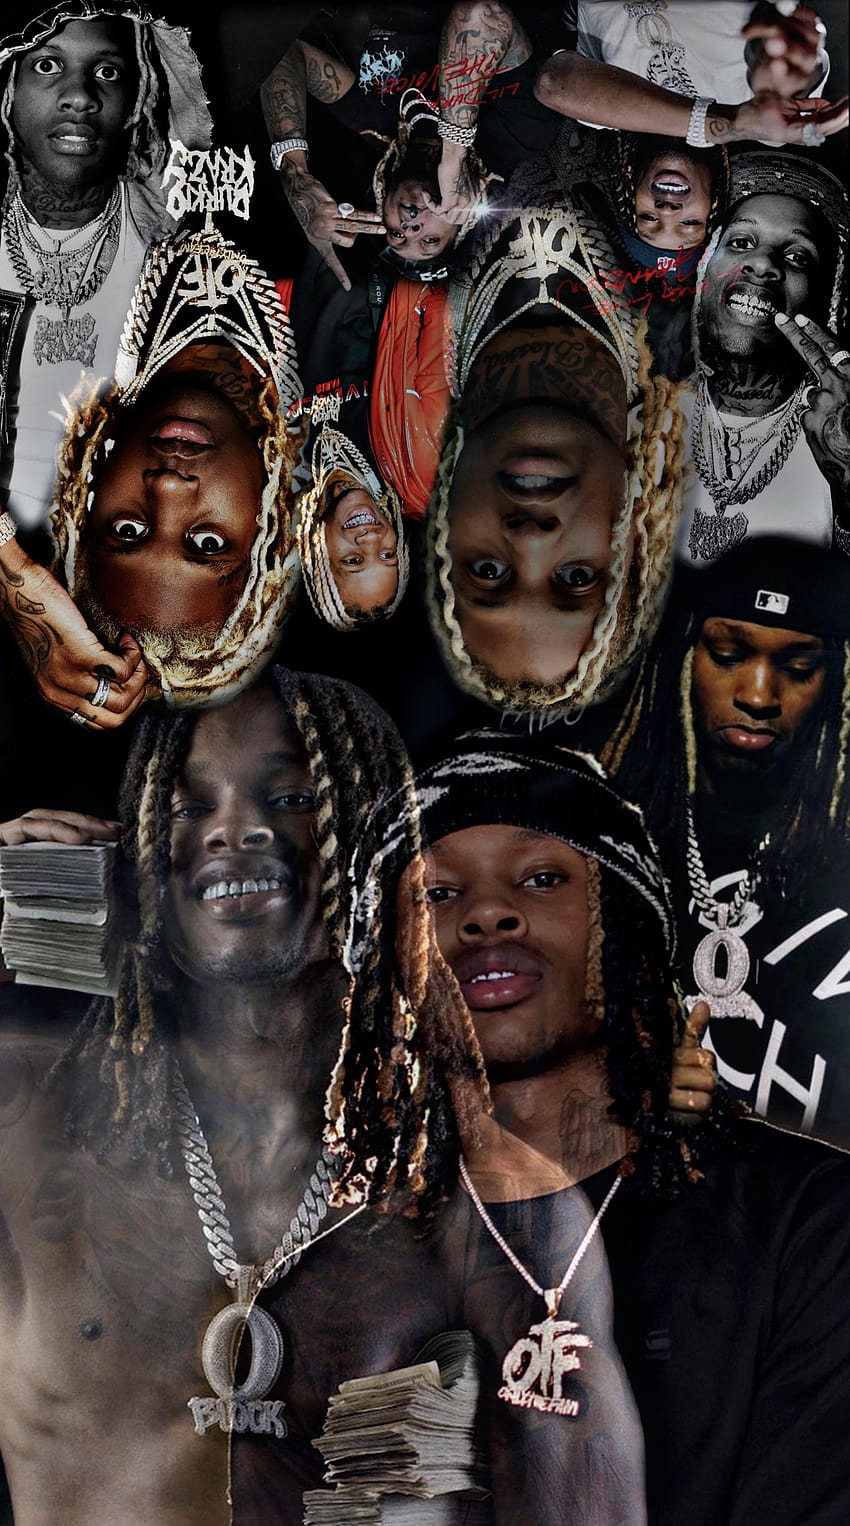 Share more than 65 lil durk and king von wallpaper best - in.cdgdbentre